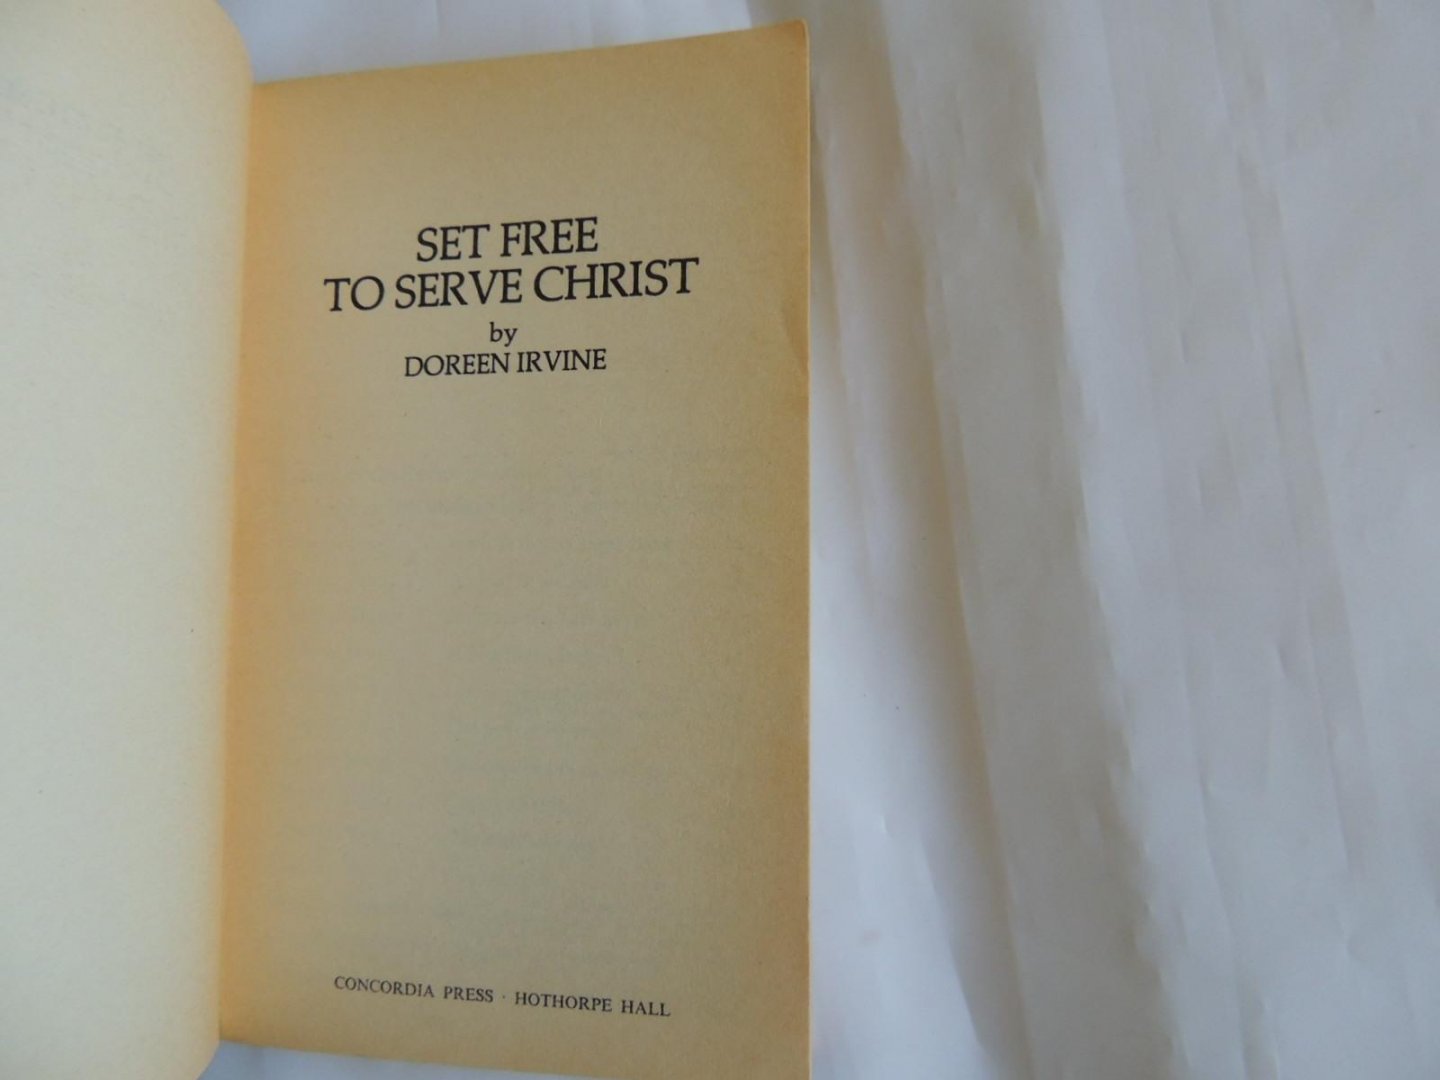 Doreen irvine - Set free to serve Christ - from witchcraft to CHRIST